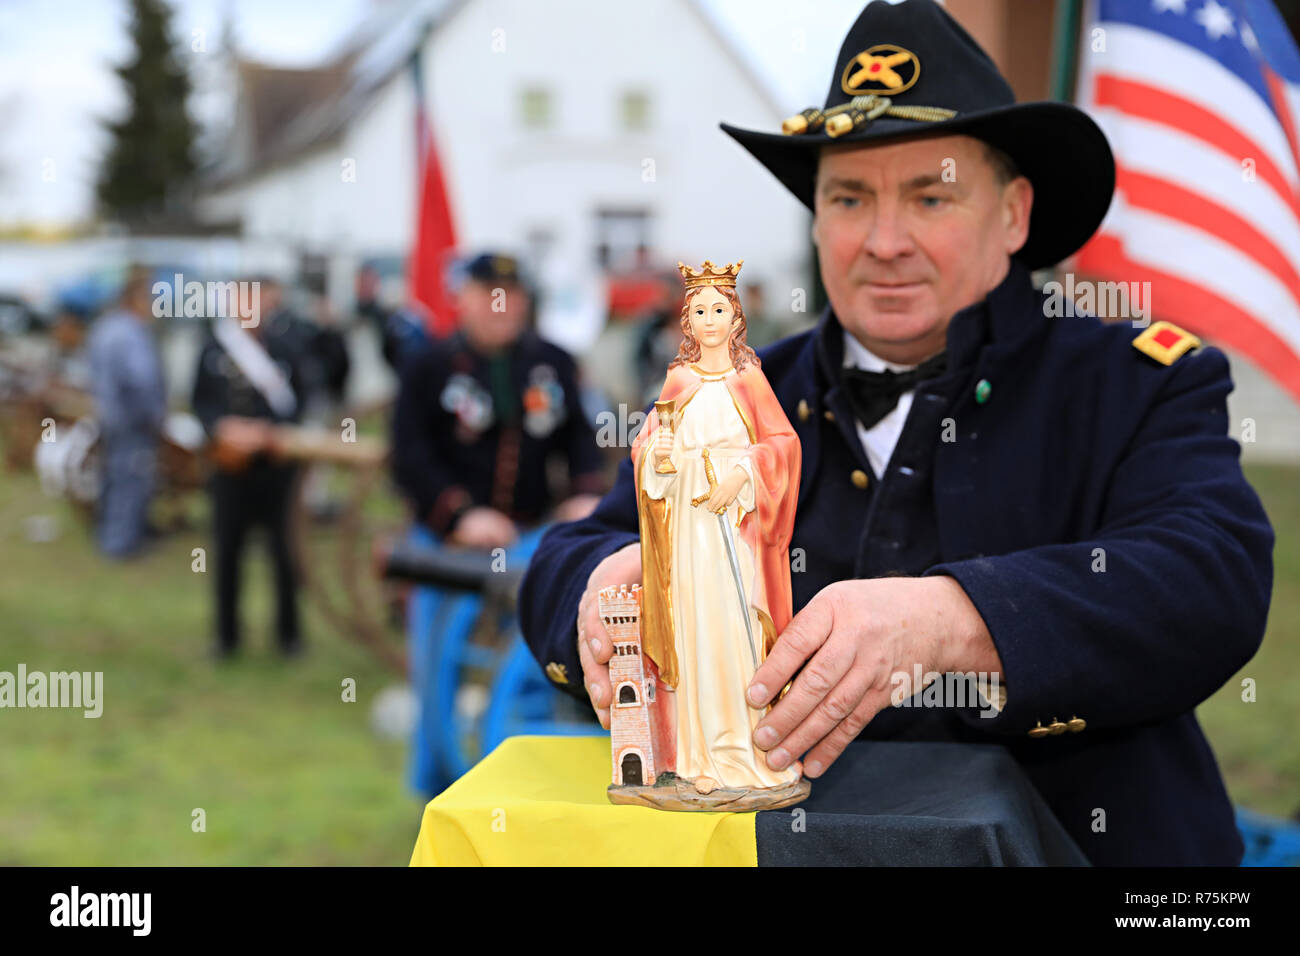 Magdeburg, Germany. 08th Dec, 2018. Firecracker Captain Mirko Bock sets up a figure of Saint Barbara, the patron saint of the cannoneers, at the Klutturm. The firecrackers are for a peaceful purpose, to honour the canonized Barbara von Nikomedien, who among other things is the patron saint of artillery, demolition master, gunner and gunsmith embodied and depicted with a cannon. Credit: Peter Gercke/dpa-Zentralbild/ZB/dpa/Alamy Live News Stock Photo